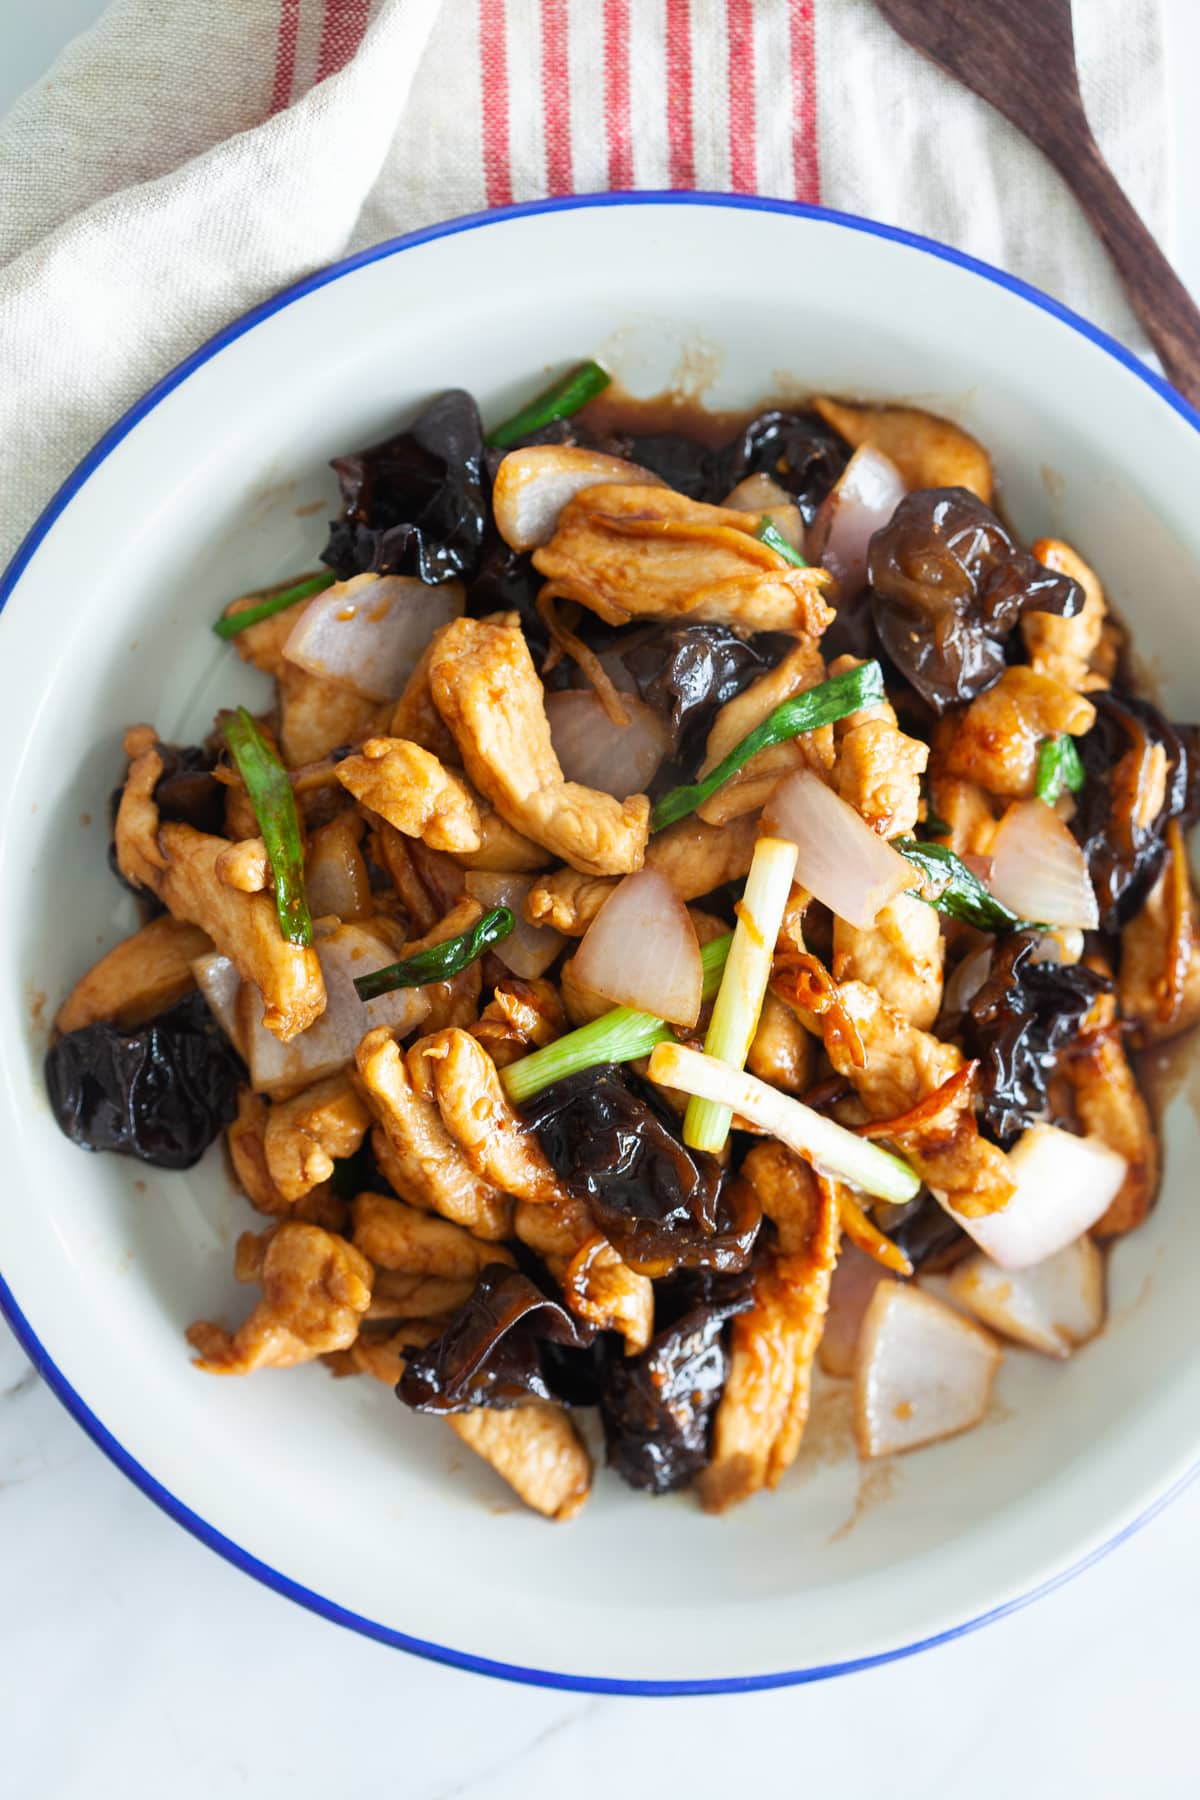 Ginger and black fungus chicken.